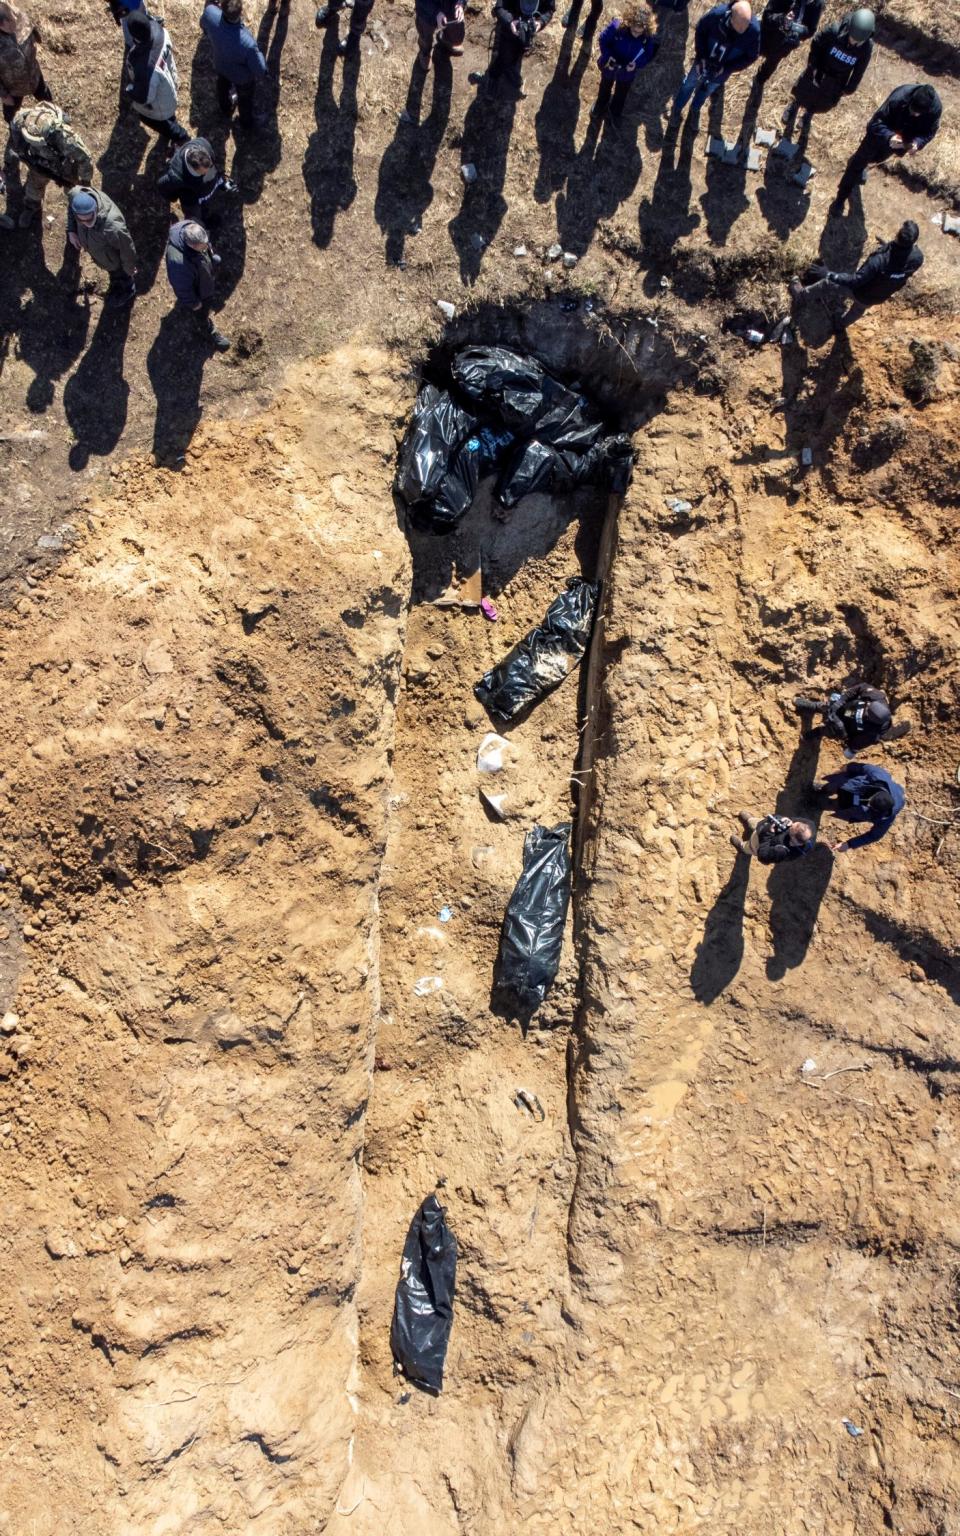 An aerial view shows bodies wrapped in plastic in a mass grave in the Bucha area - Paul Grover for the Telegraph